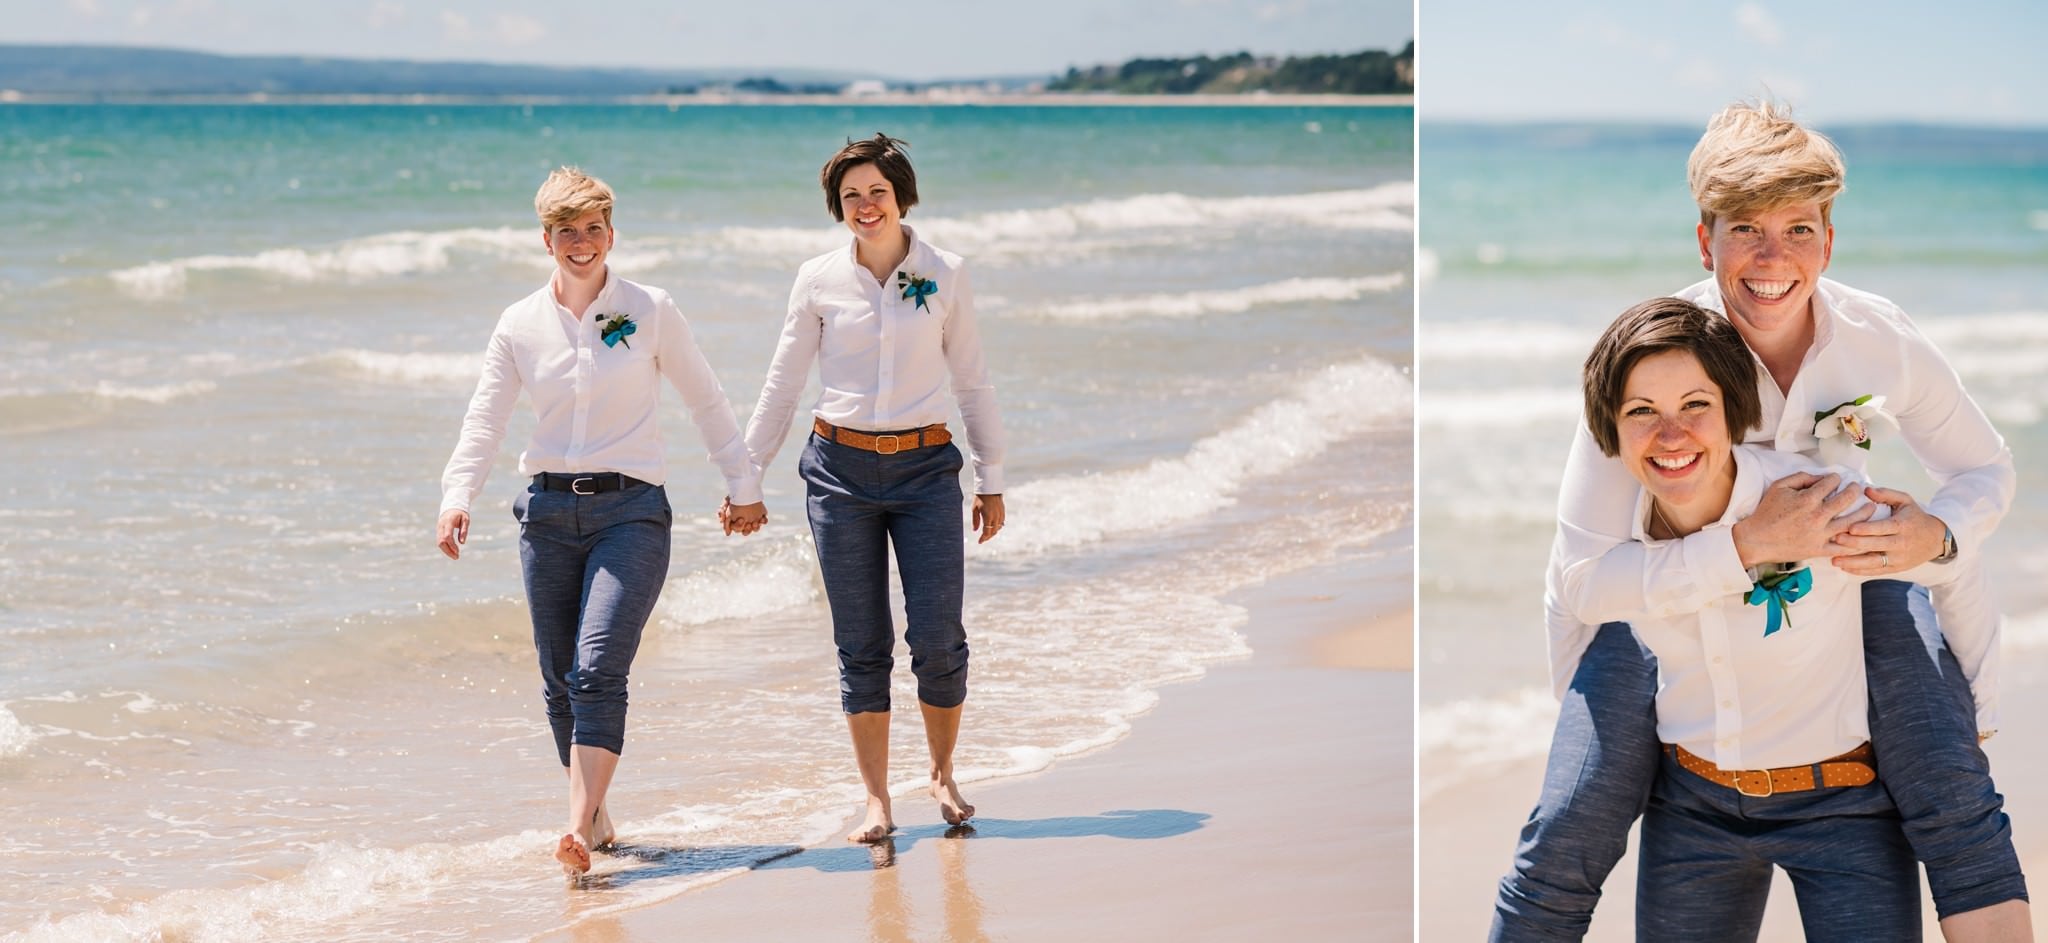 Bournemouth Wedding photography at the beach